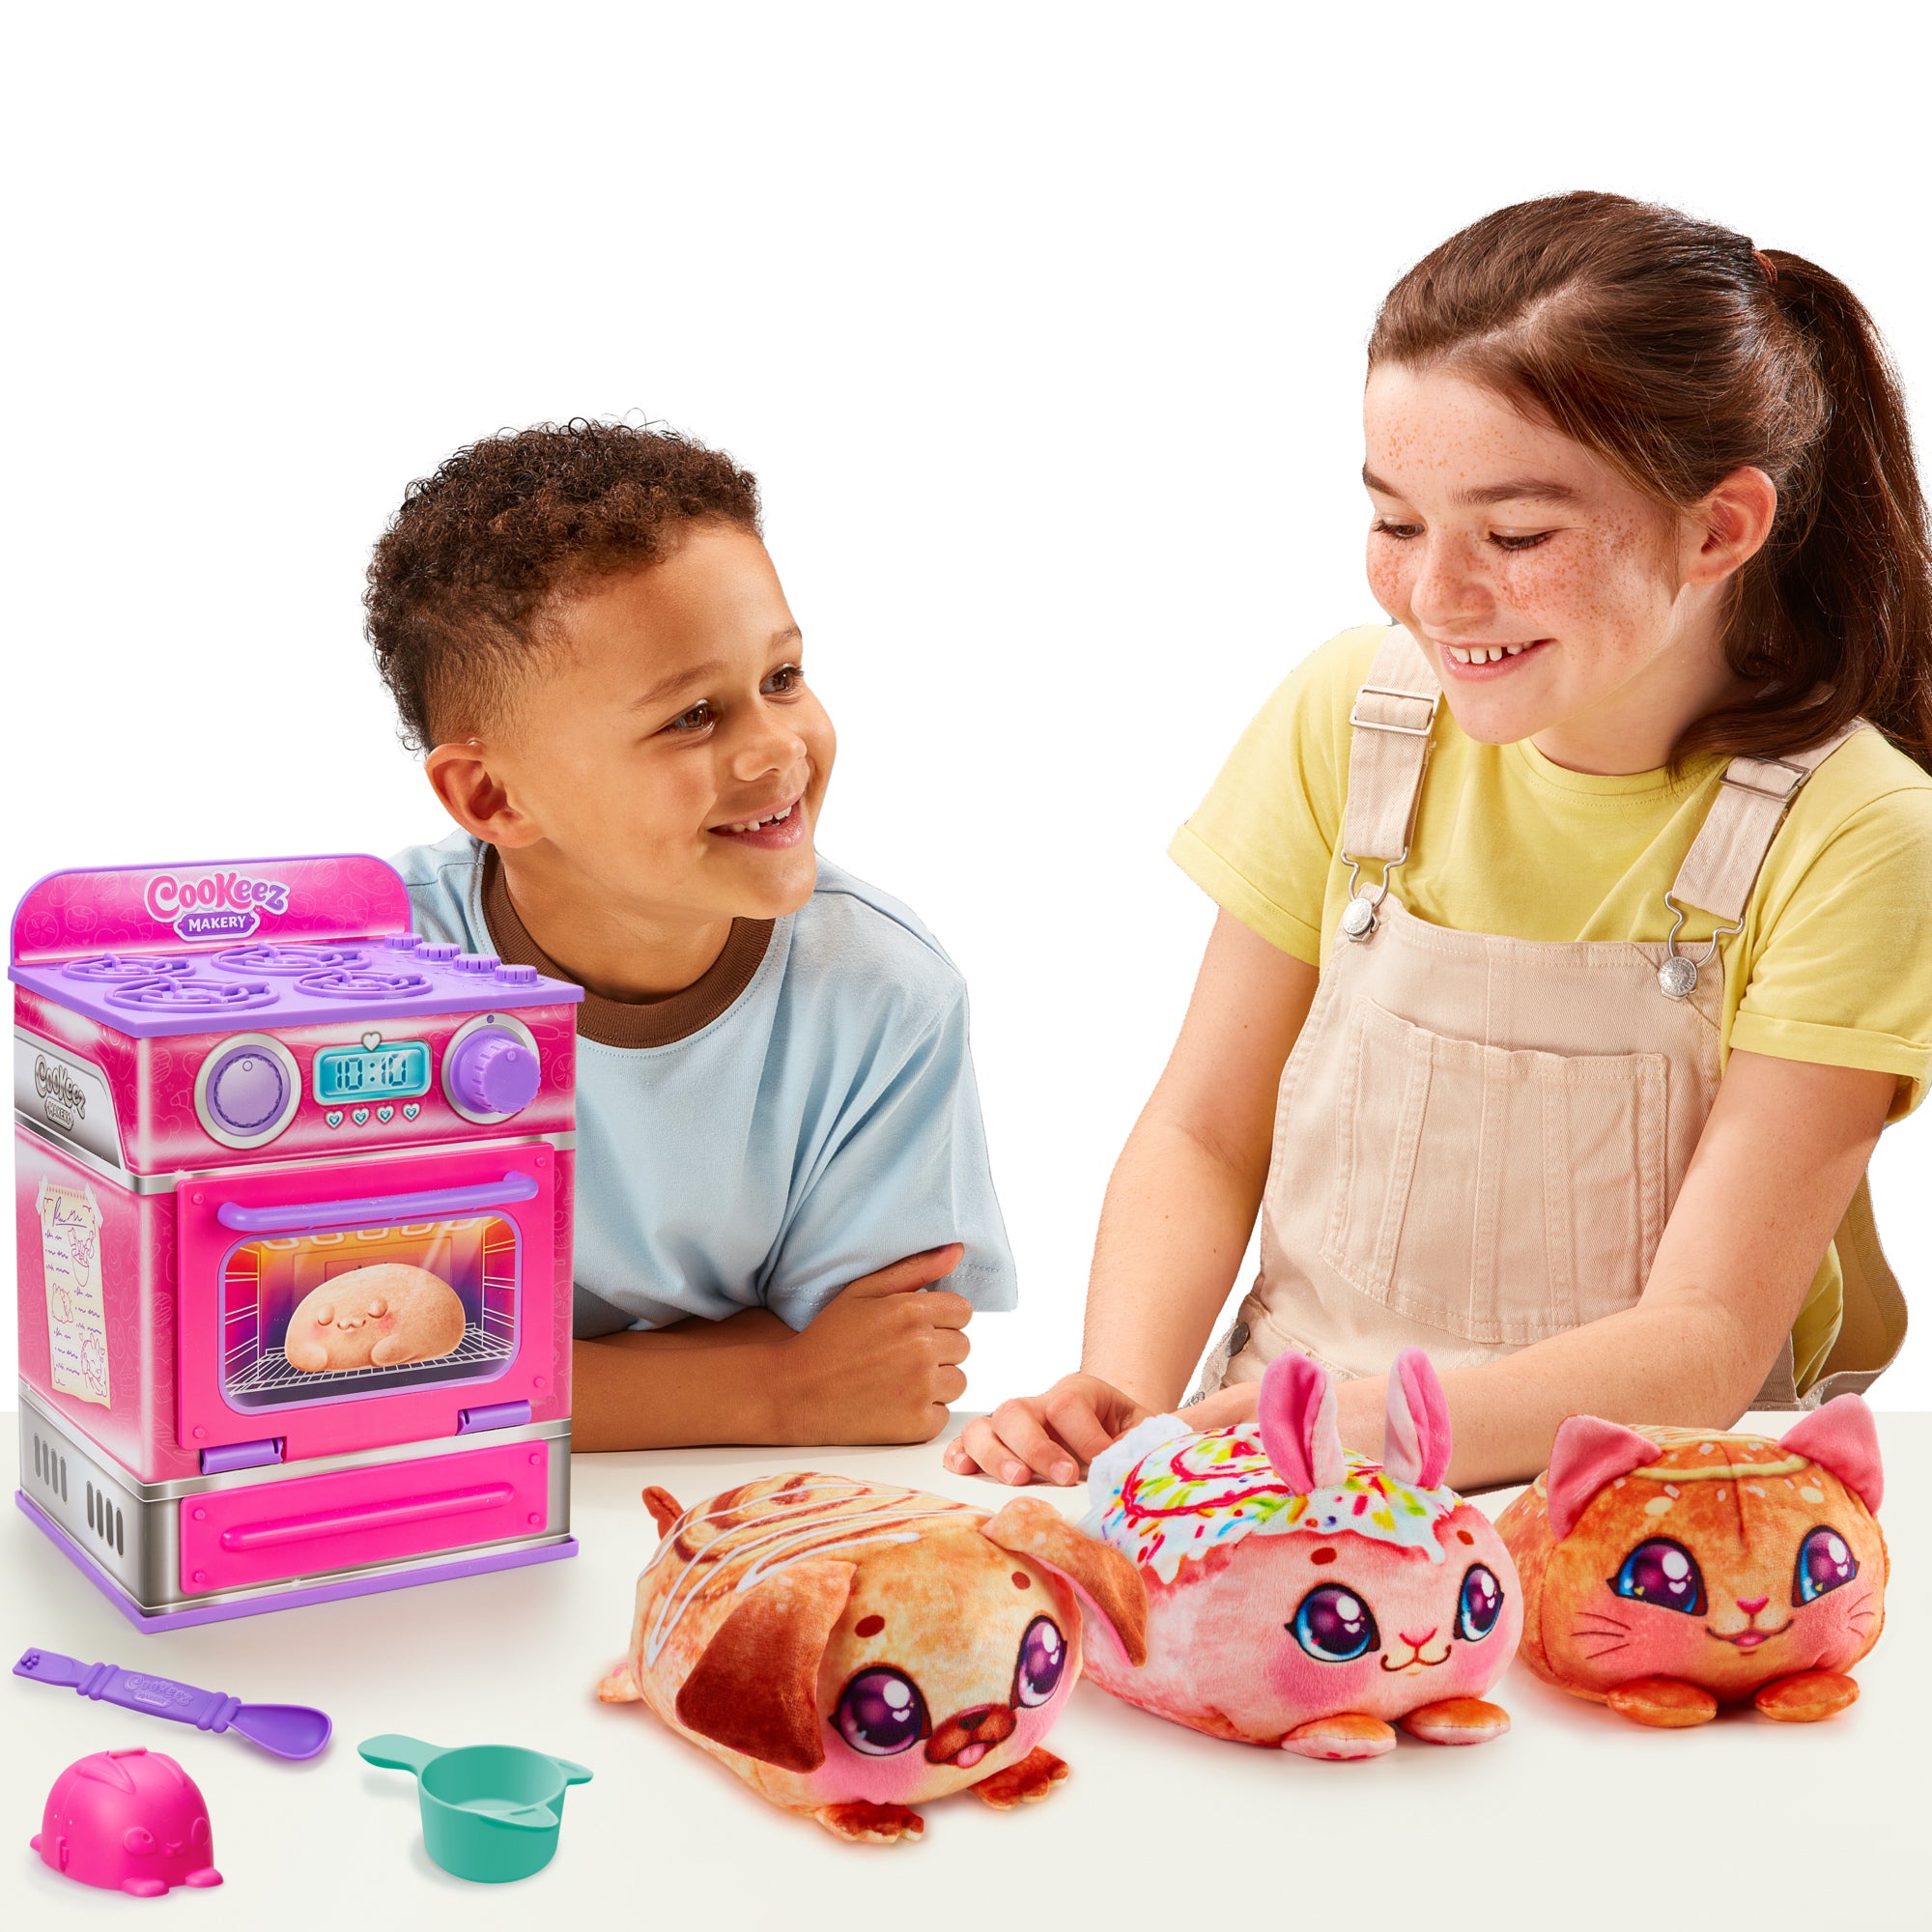 Cookeez Makery Cinnamon Treatz Pink Oven, Scented, Interactive Plush, Styles Vary, Ages 5+ | MTTS163